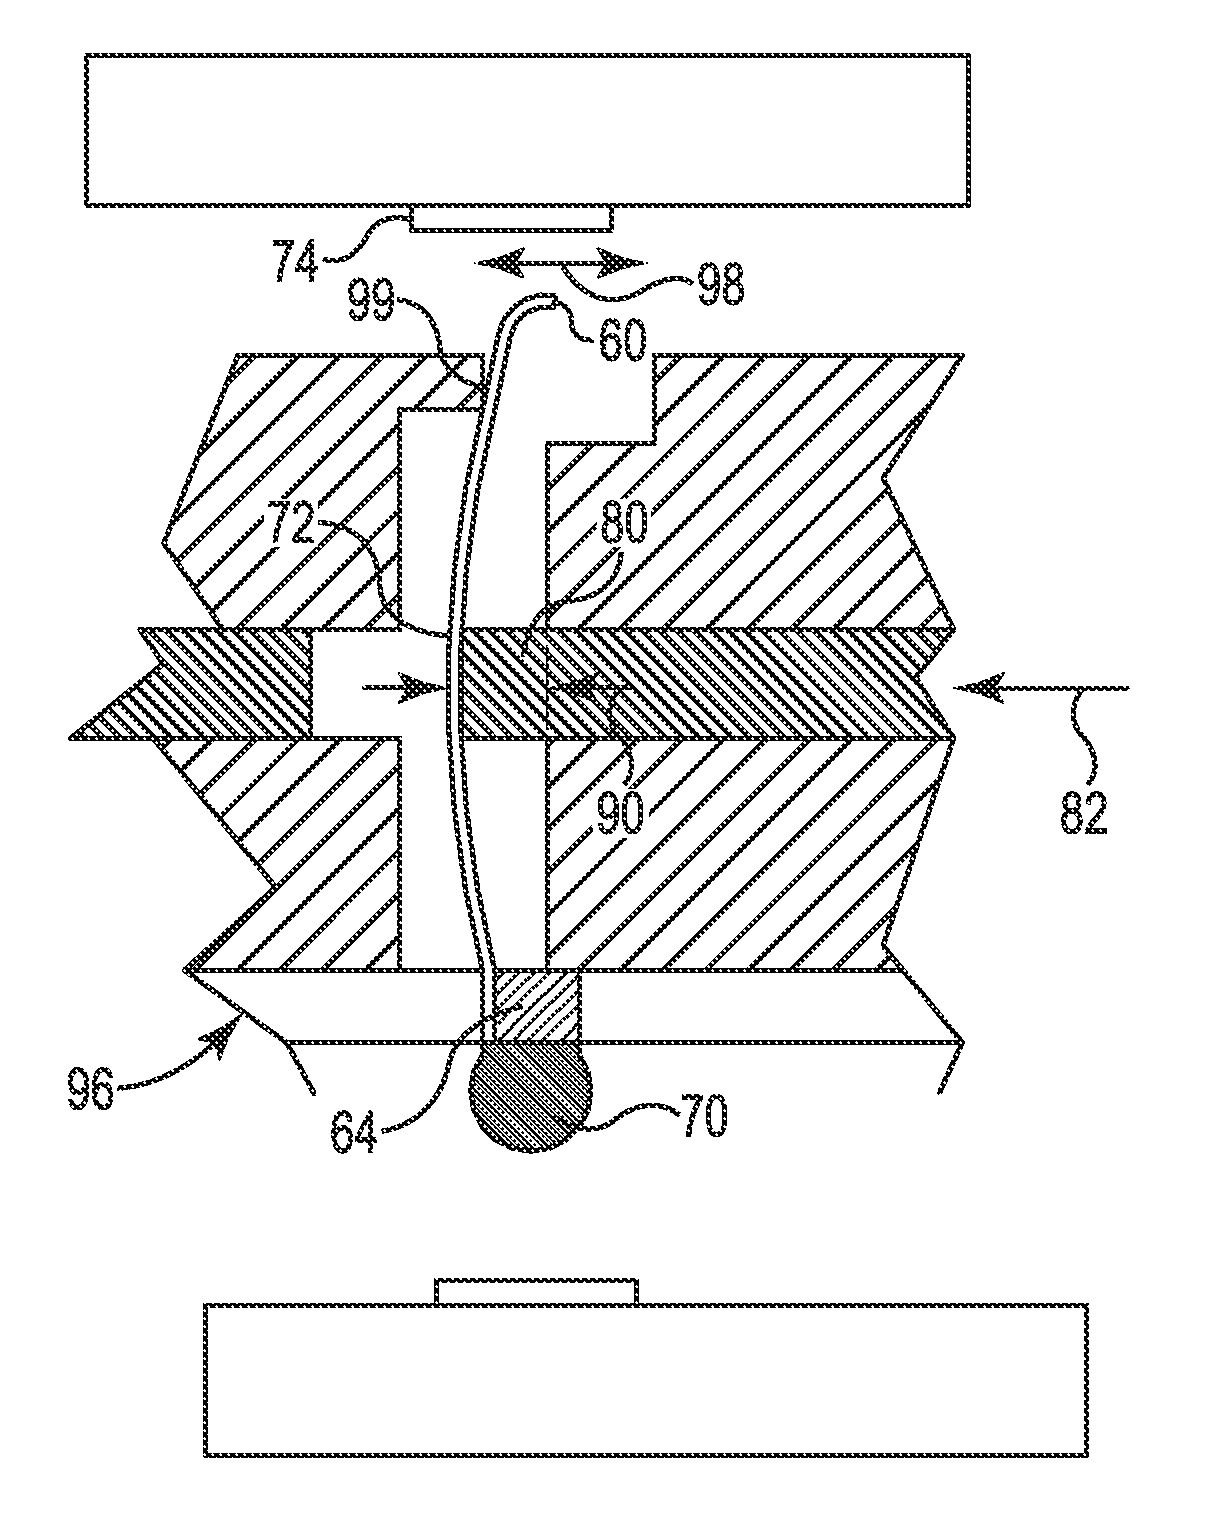 Method of making an electronic interconnect